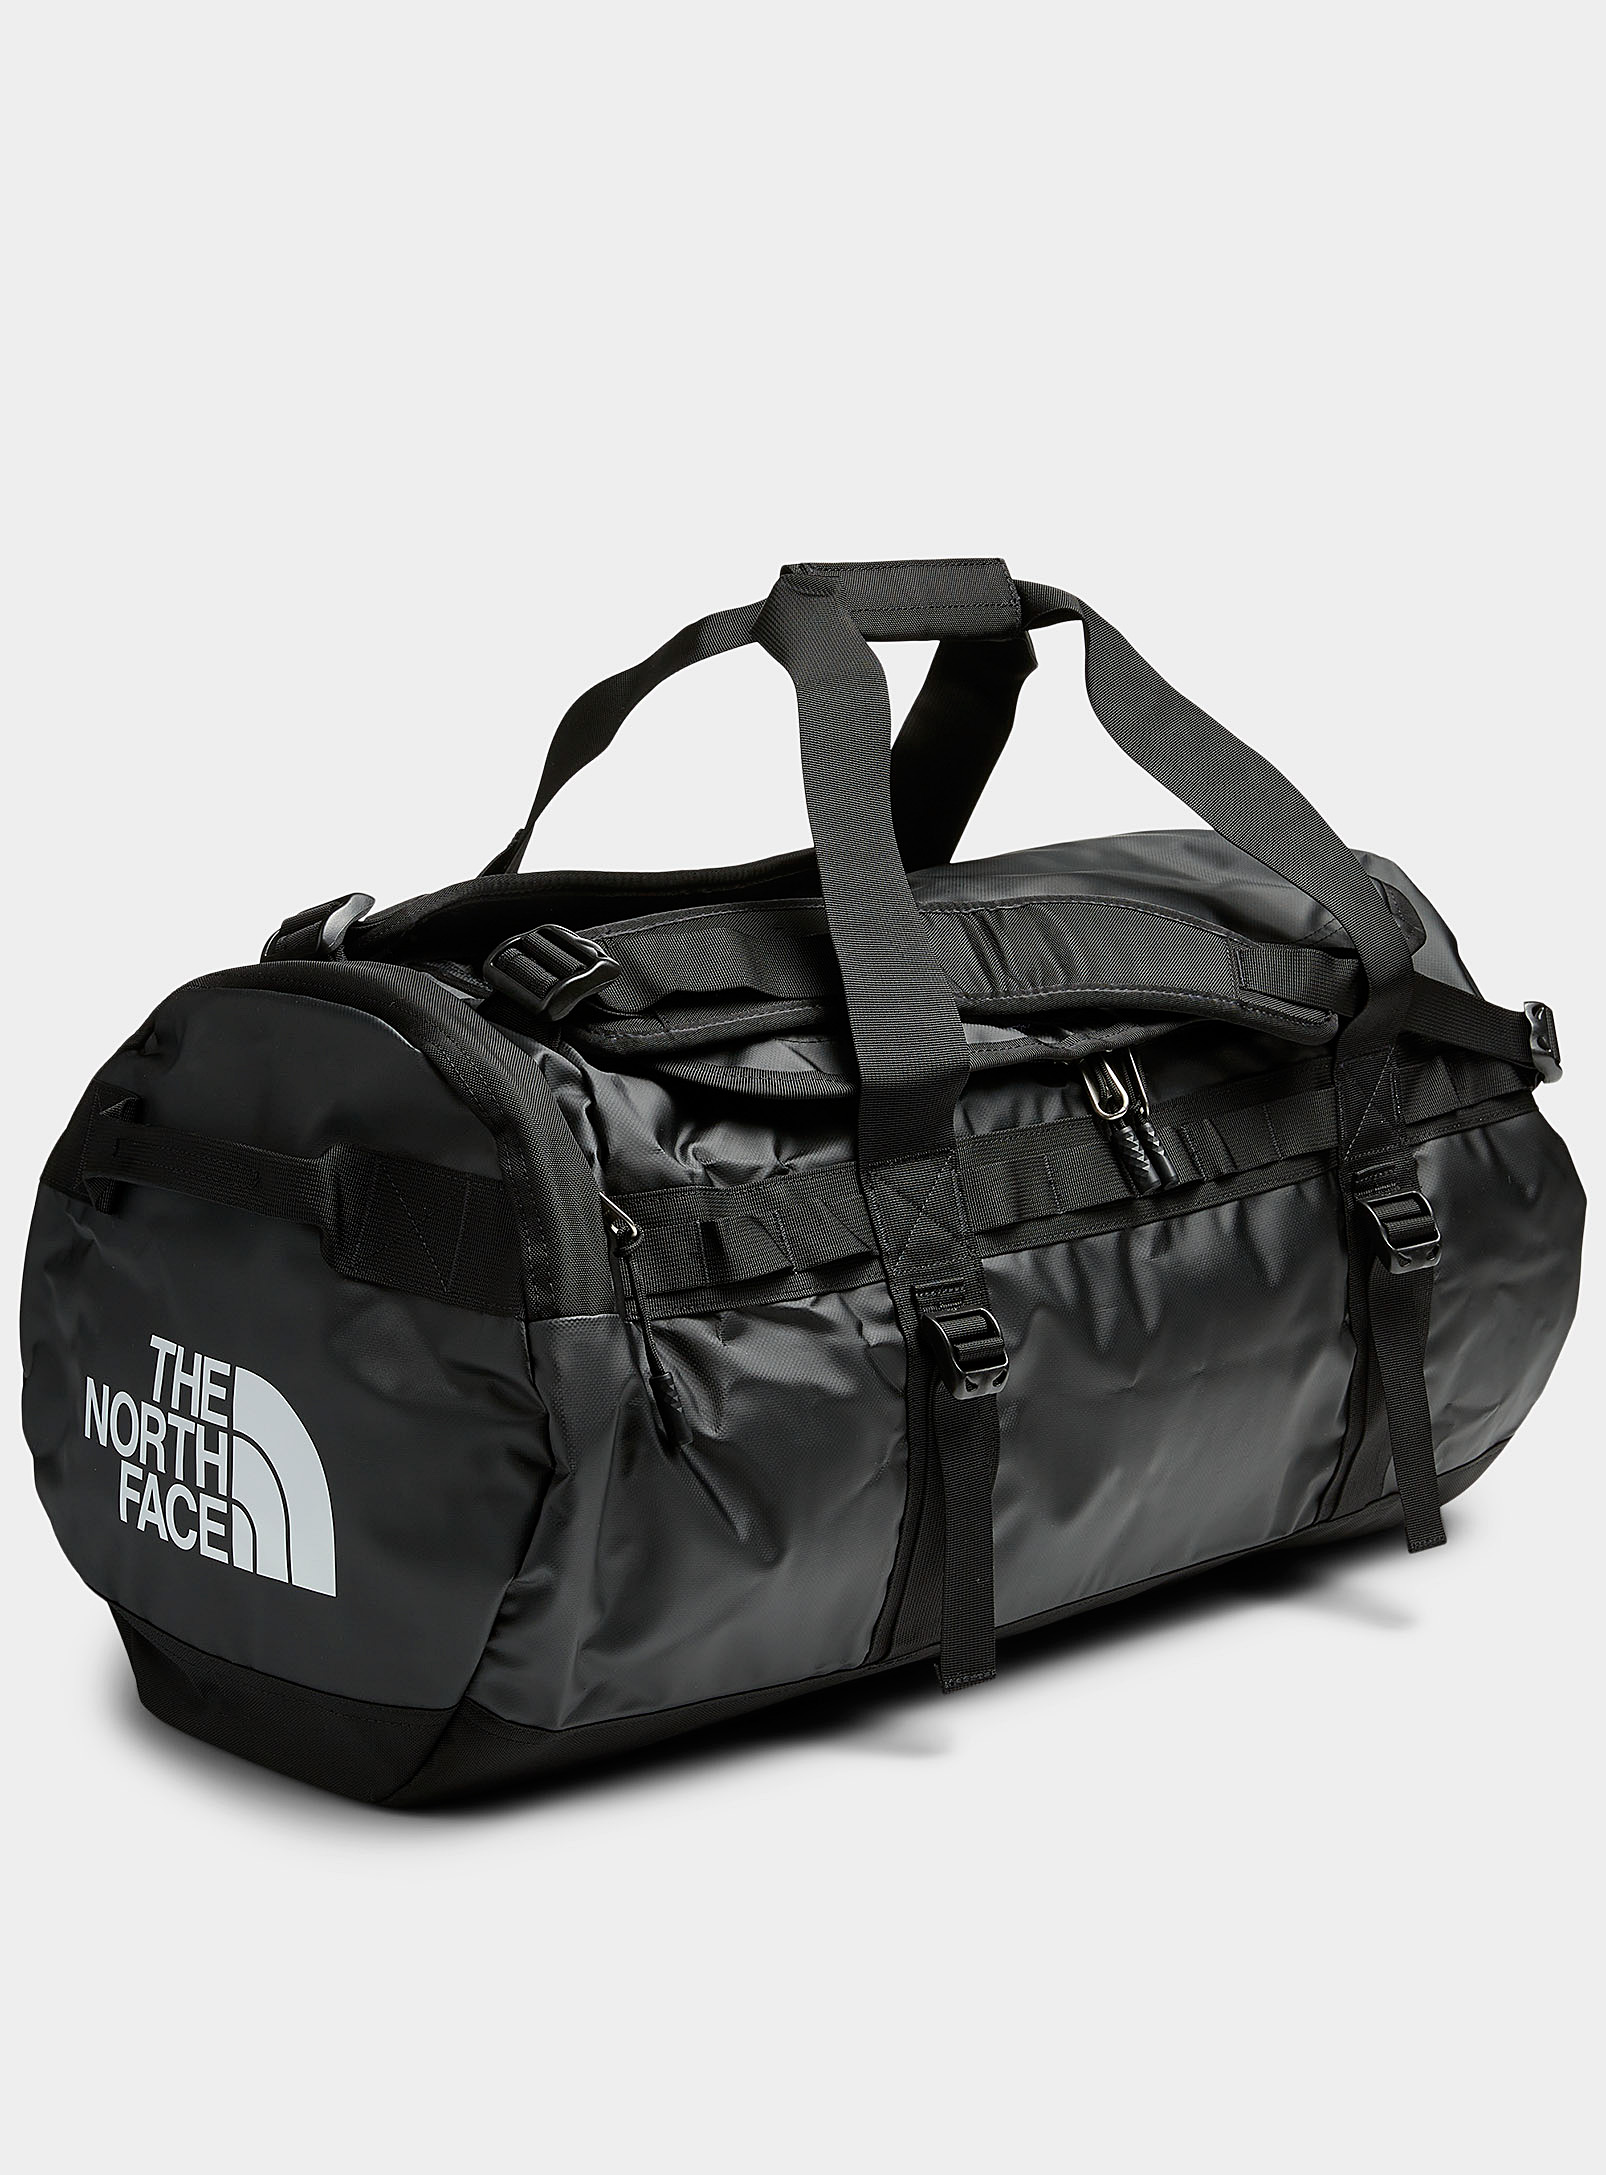 The North Face Base Camp Duffle Bag In Patterned Black